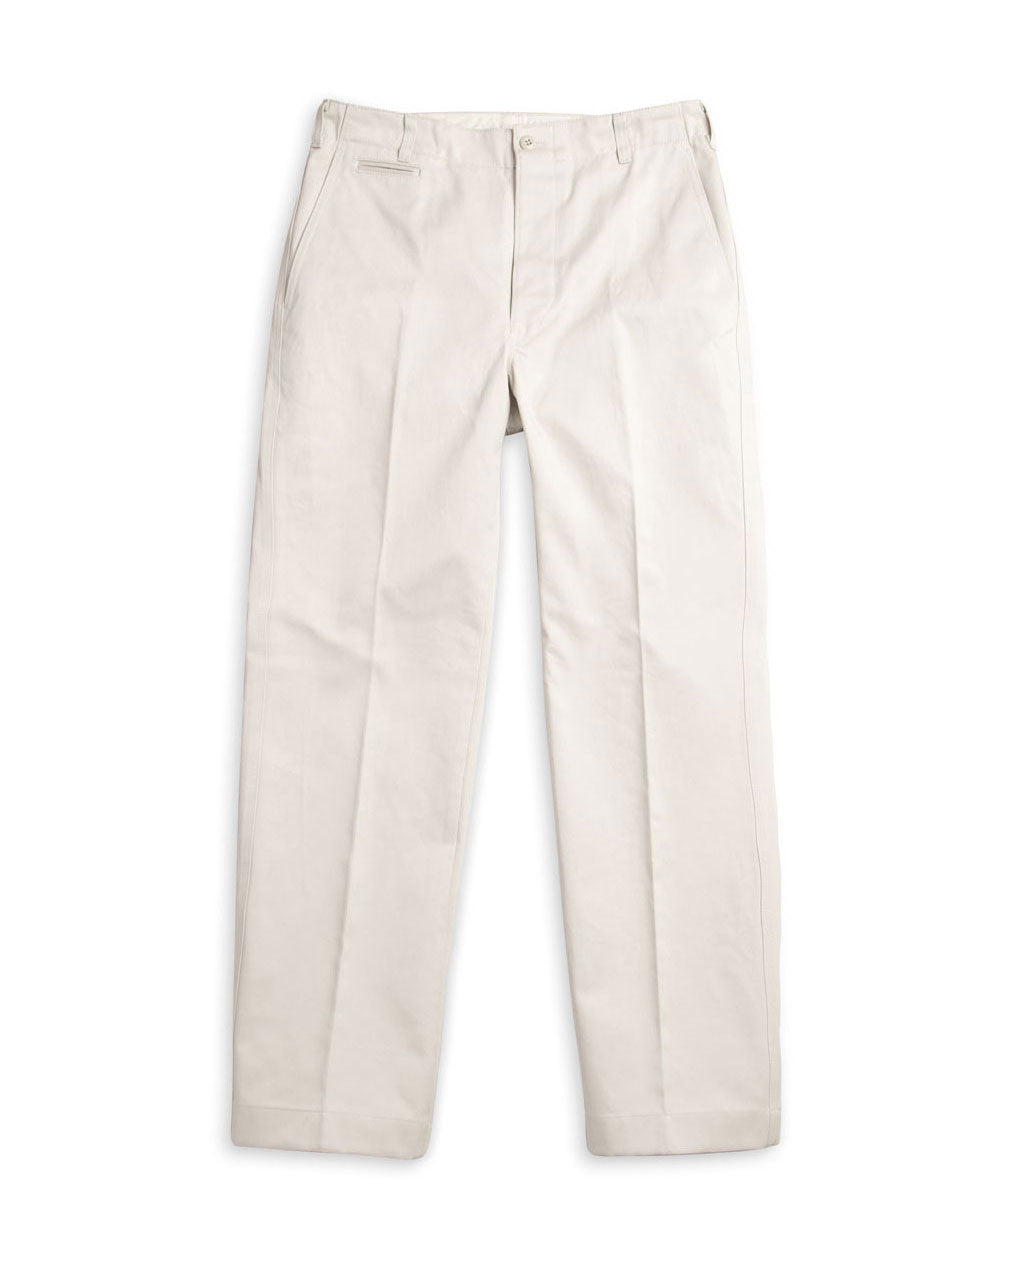 Officer's Chino in Ivory